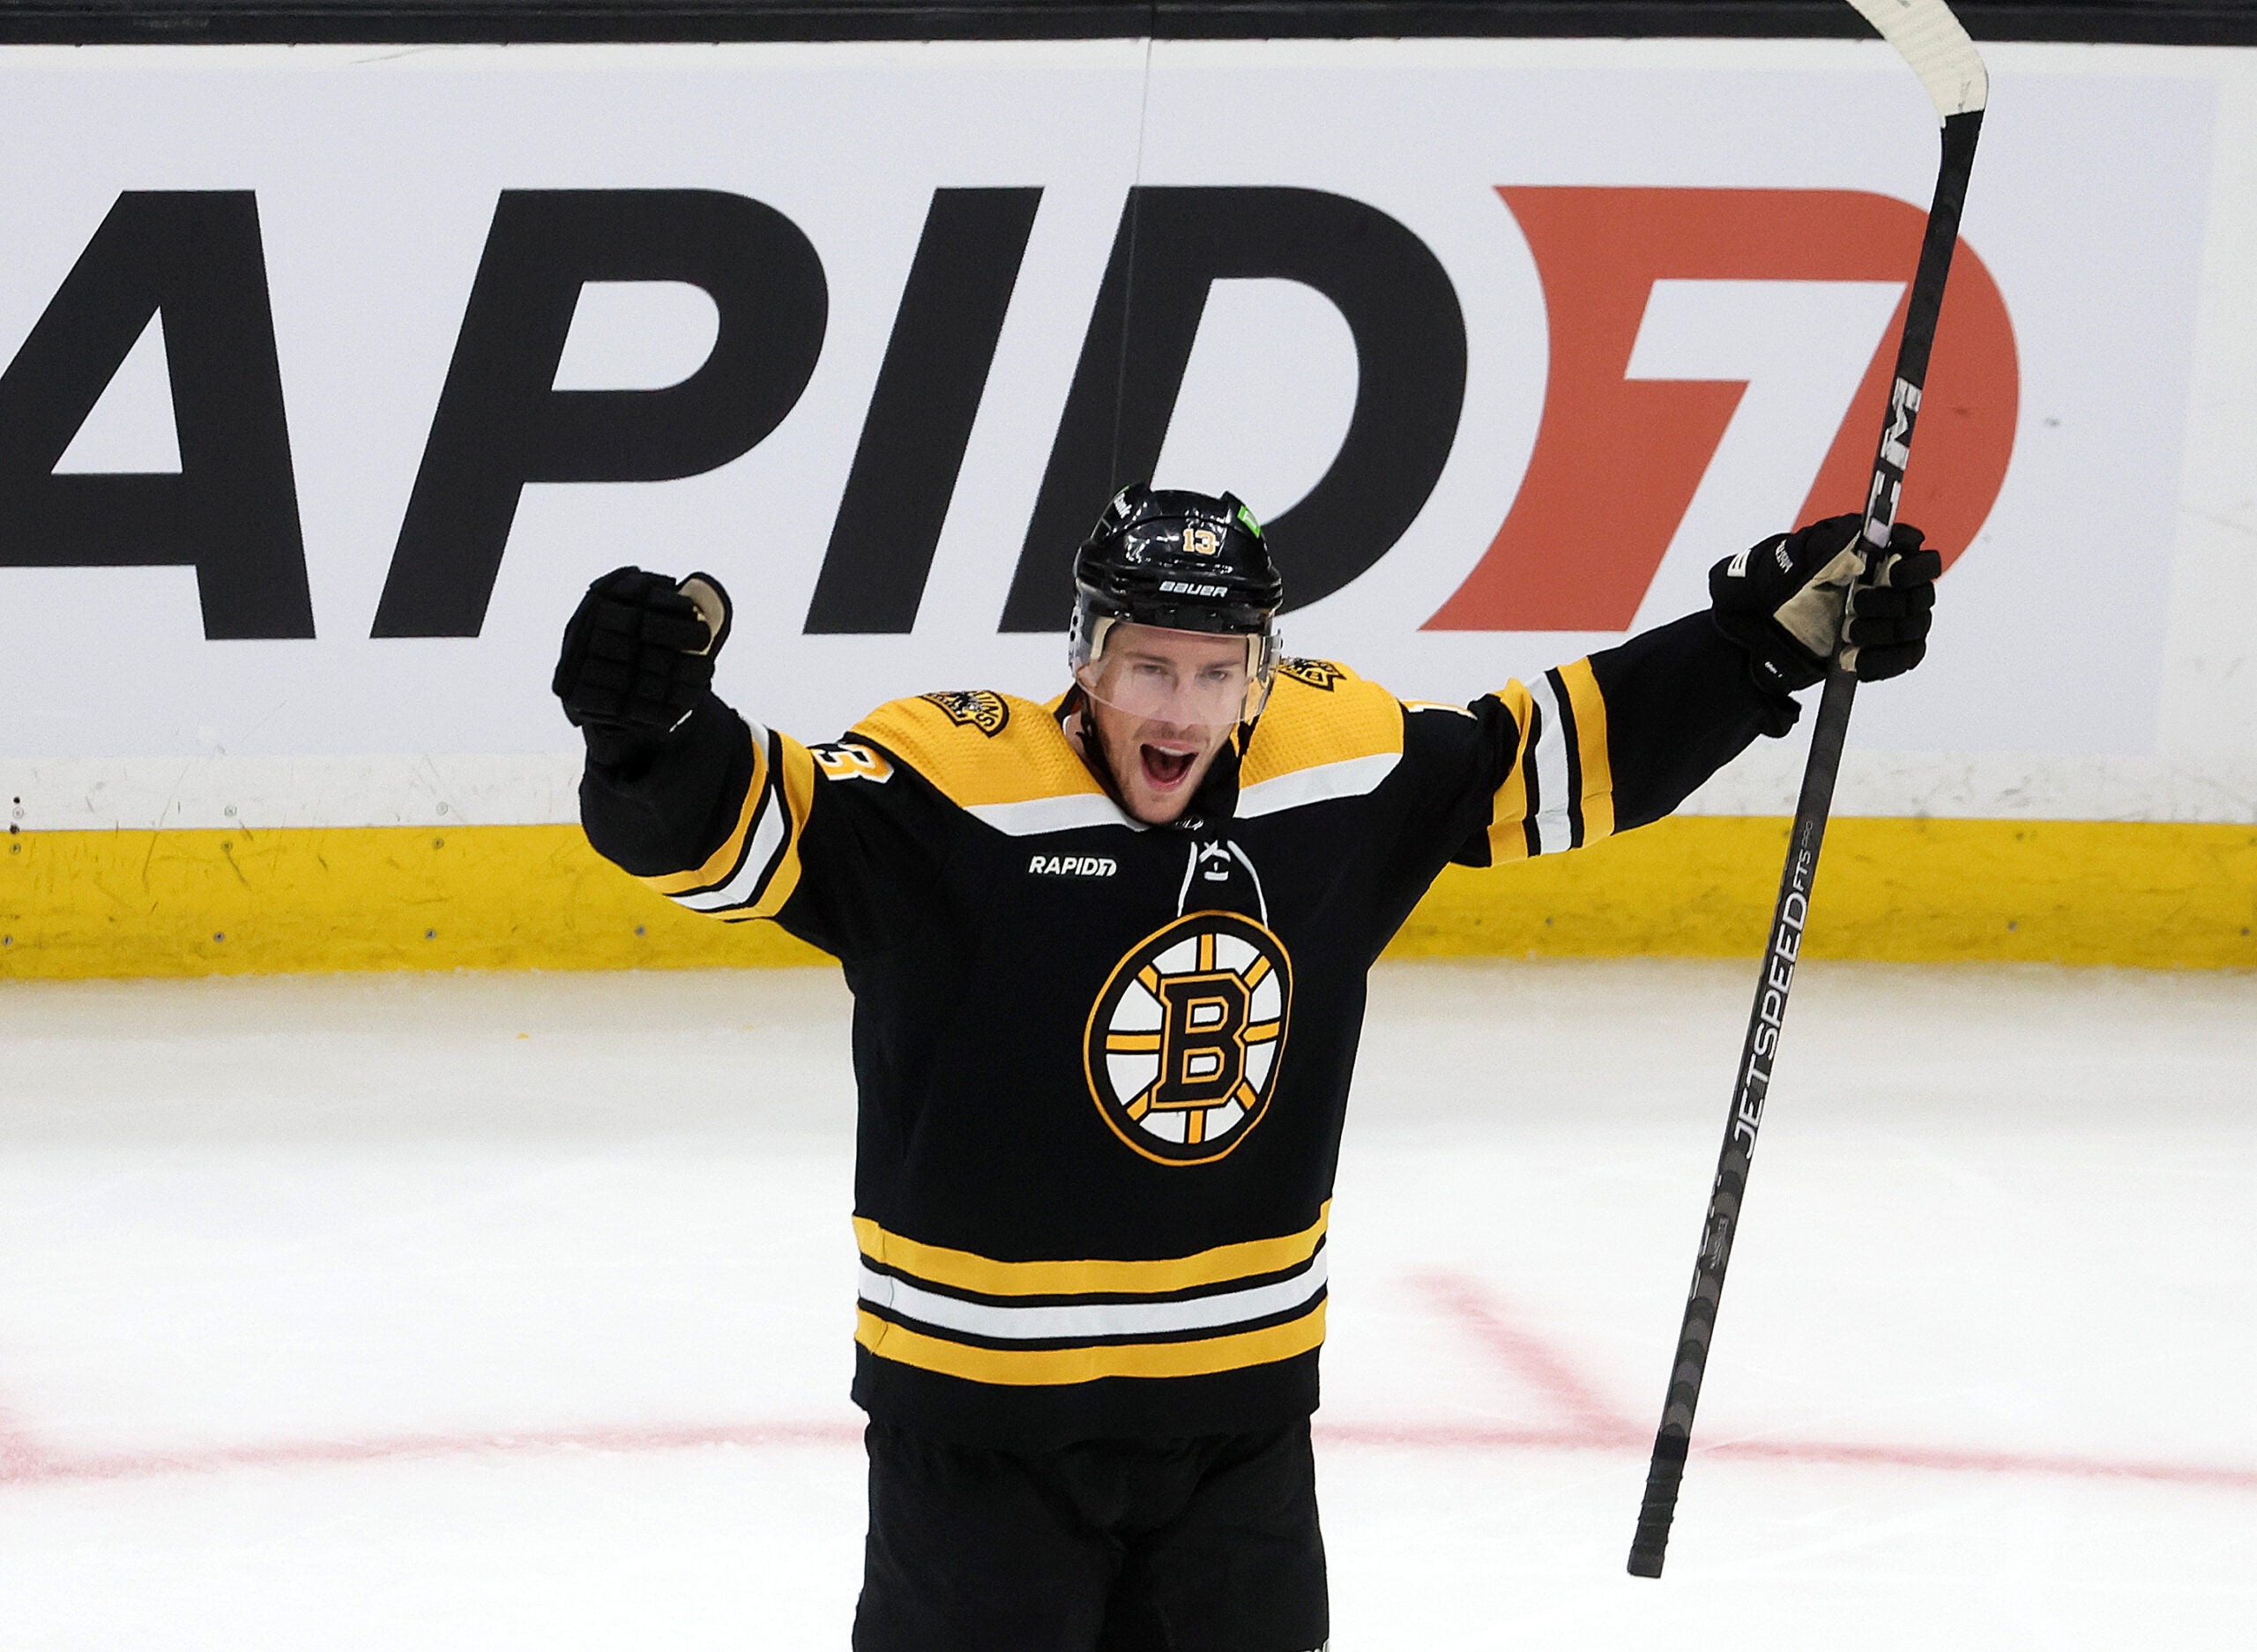 Boston Bruins center Charlie Coyle (13) celebrates his game tying goal scored in the third period. The Boston Bruins host the Toronto Maple Leafs on April 6, 2023 at TD Garden in Boston, MA.